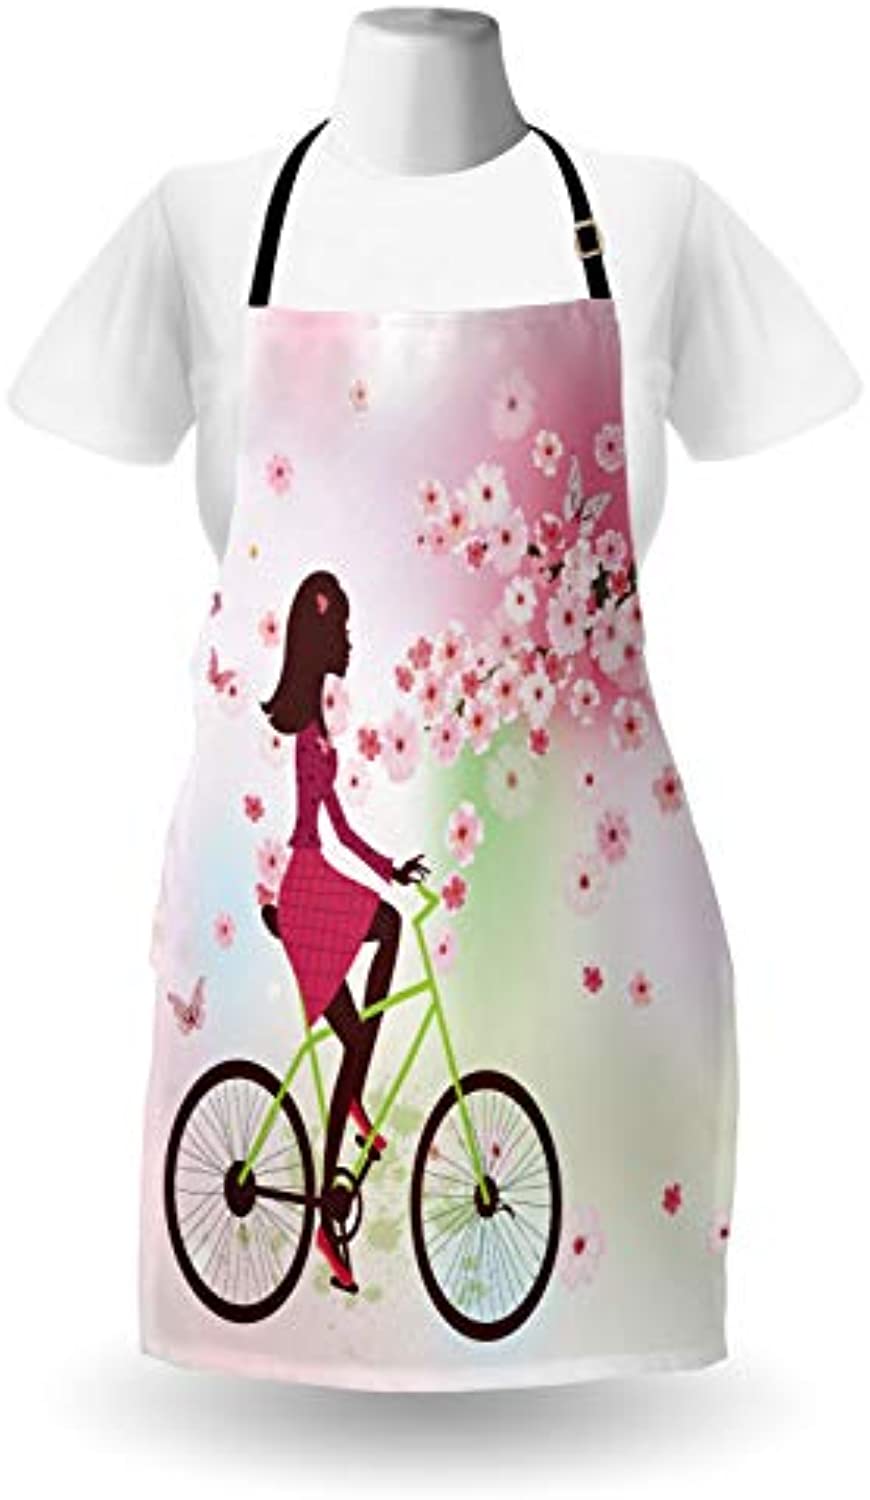 Granbey Feminine Apron  Girl on Bike Passing by Cherry Trees Blooms Spring Nature Seasonal Illustration  Unisex Kitchen Bib with Adjustable Neck for Cooking Gardening  Adult Size  Green Pink